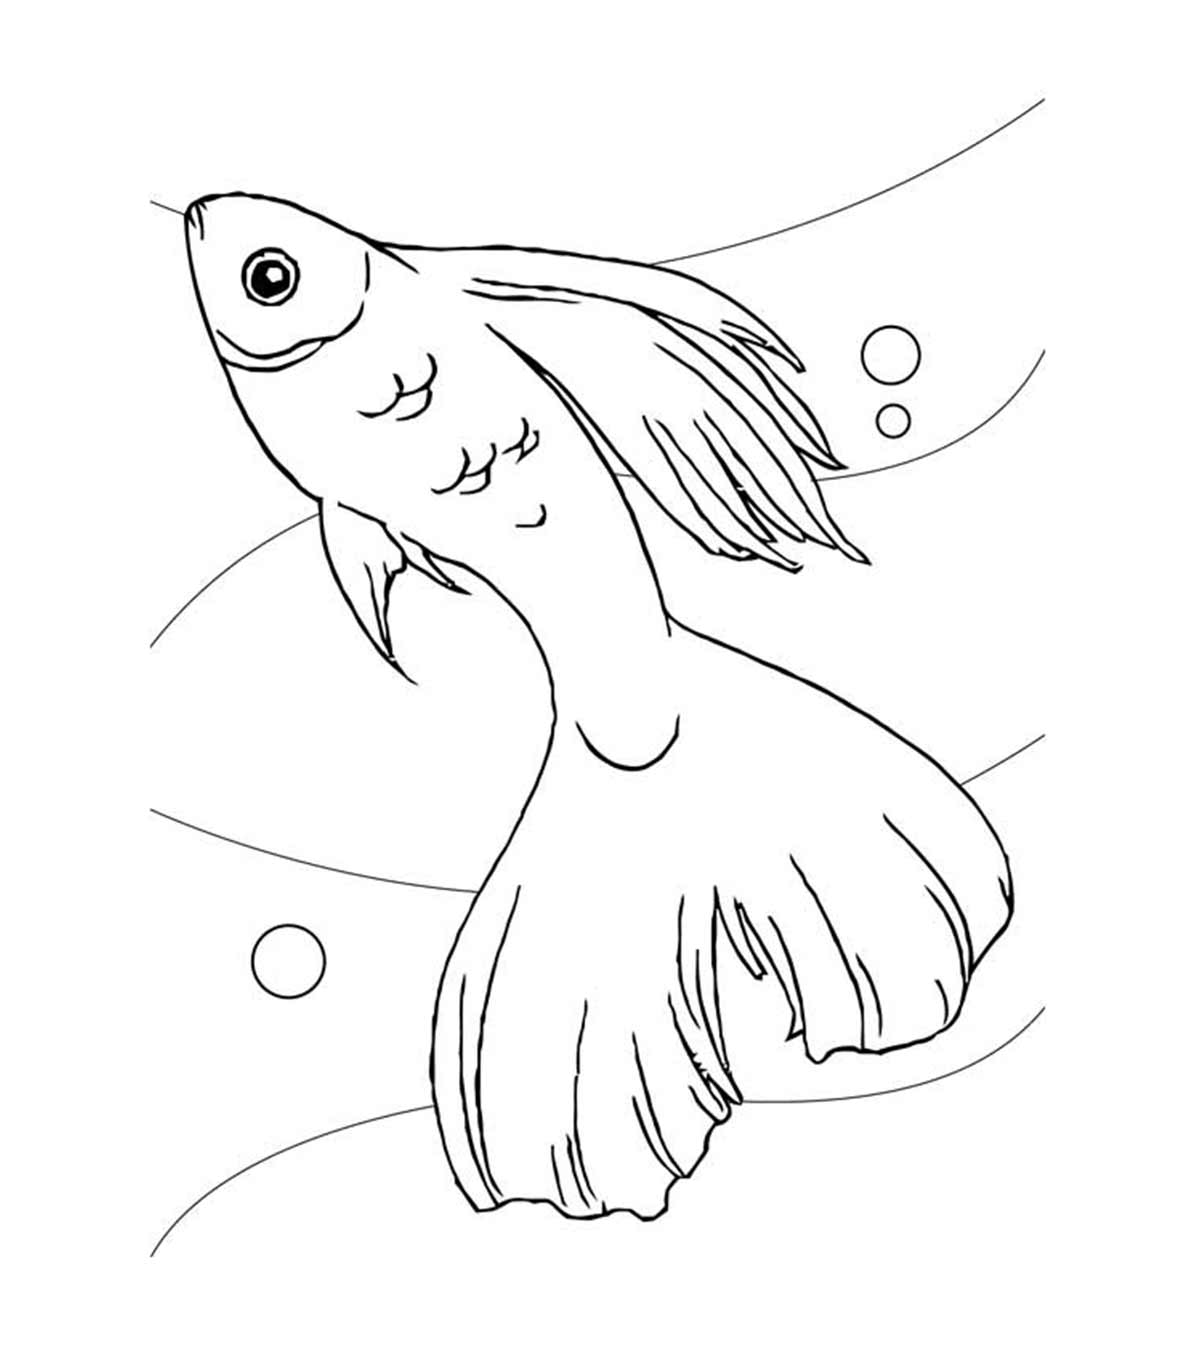 25 Interesting Koi Fish Coloring Pages For Your Toddlers